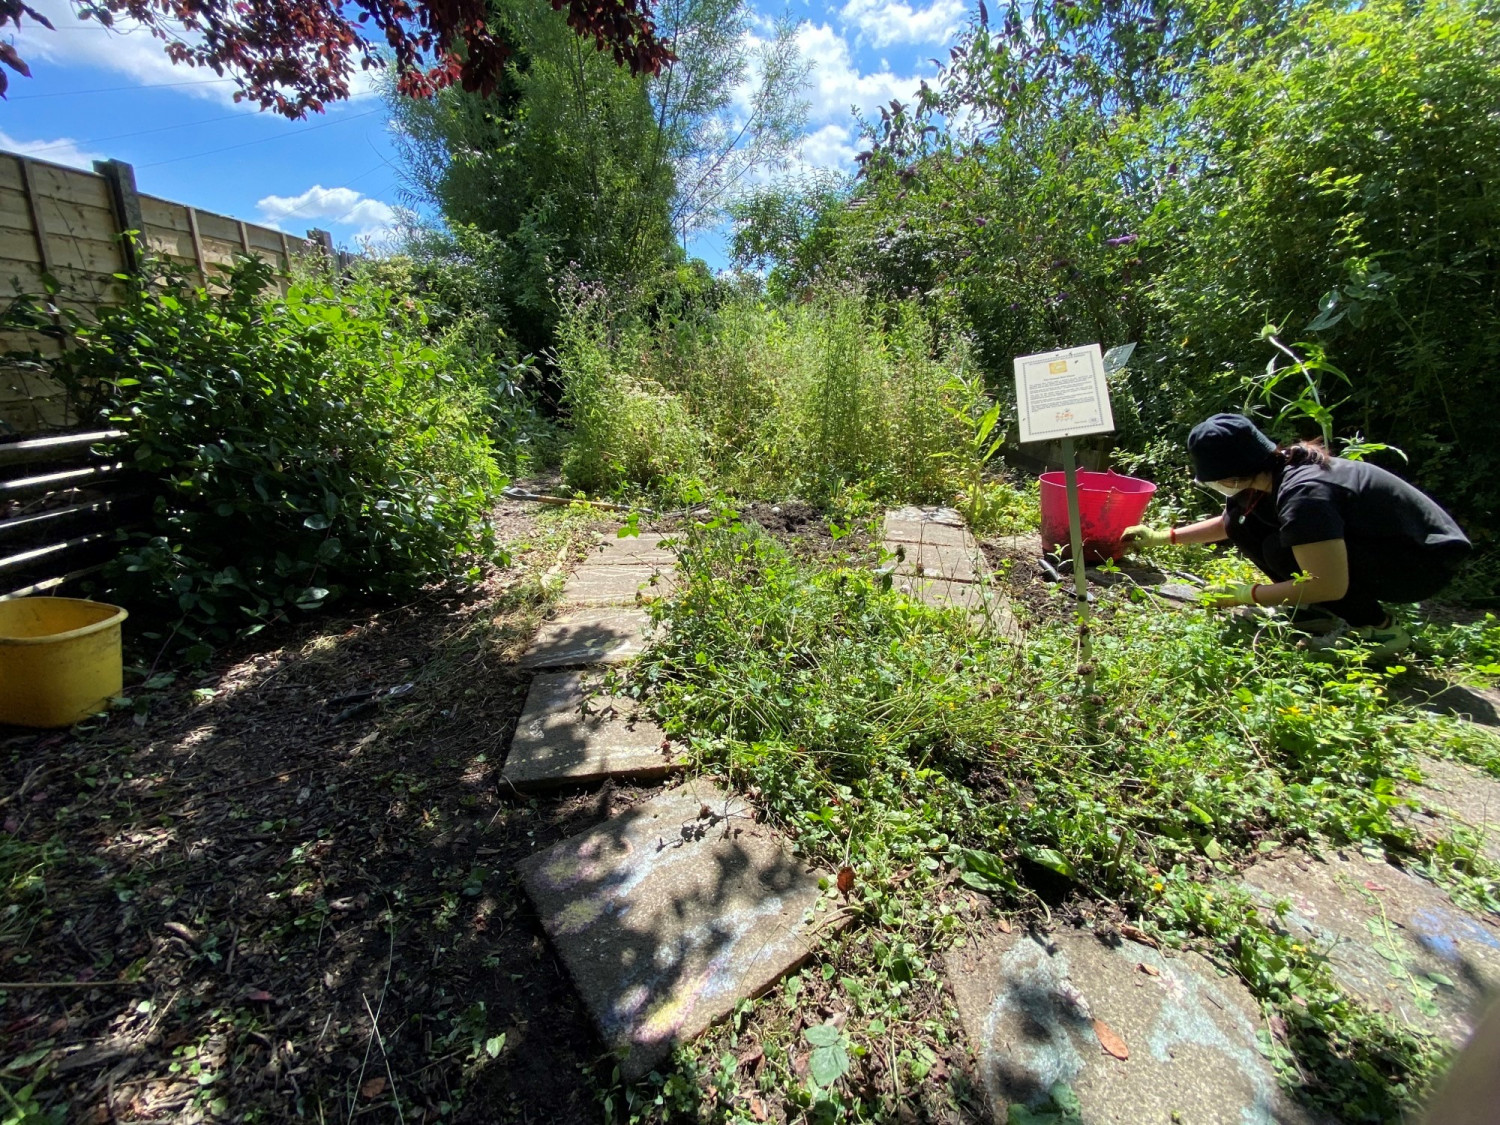 View of wildlife garden including herbs, small bushes, trees, and woman working on flowerbeds